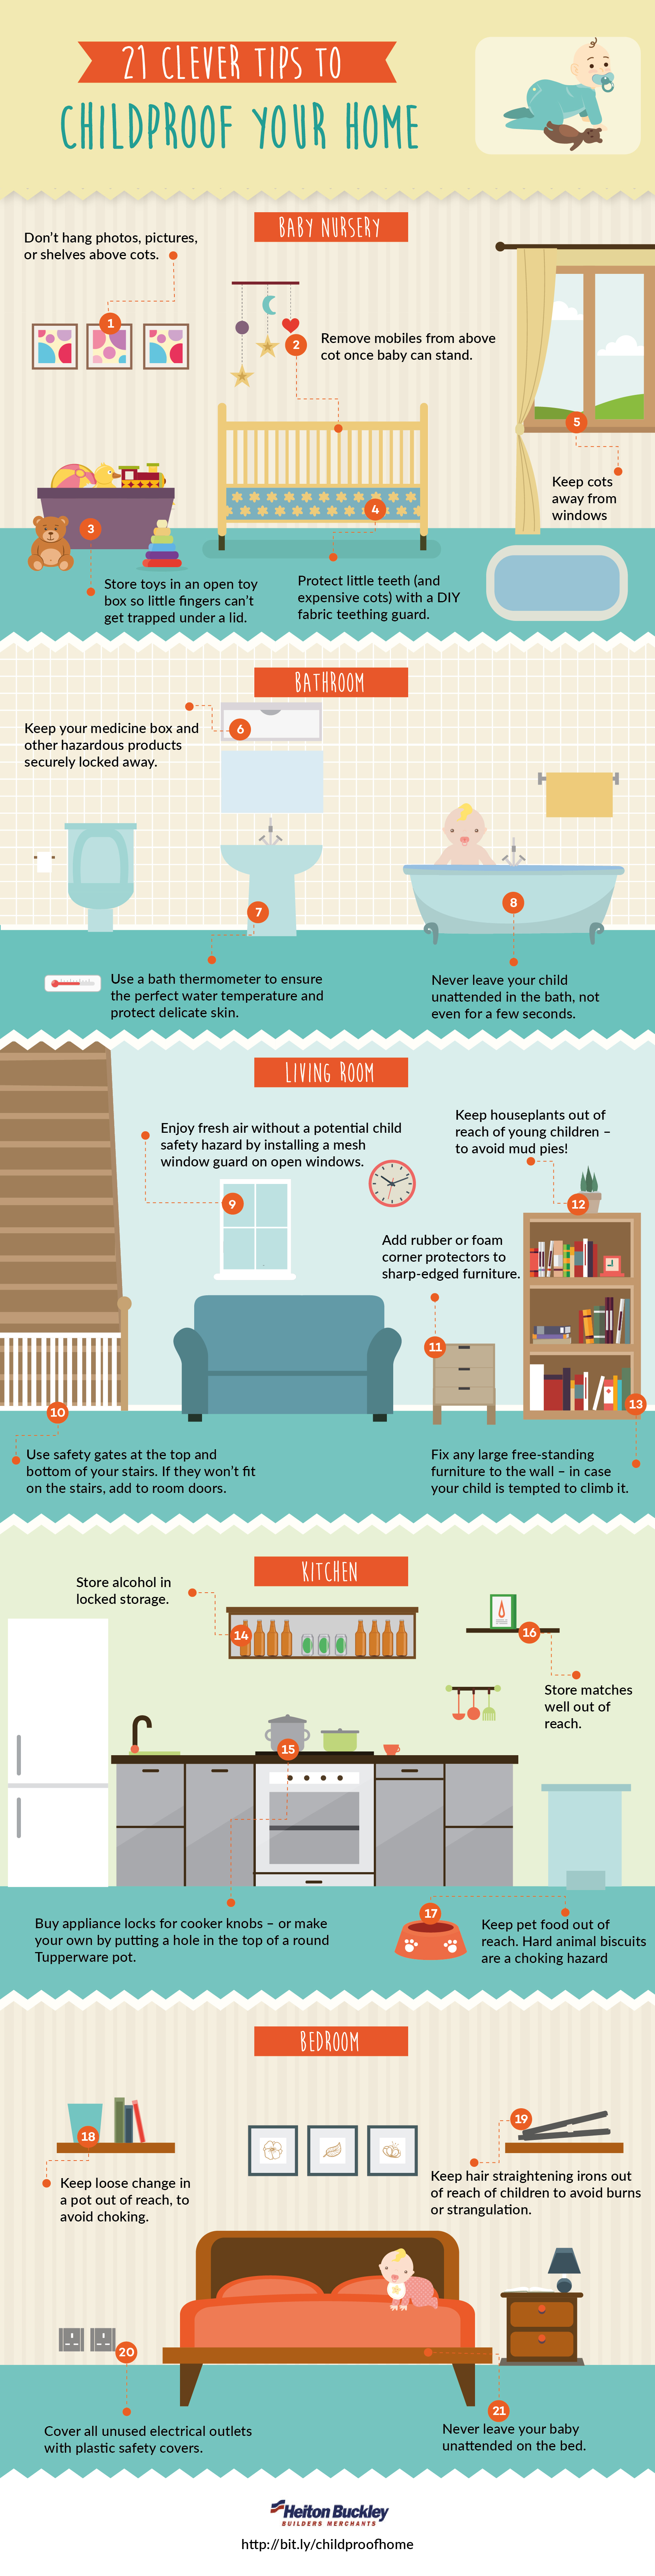 21 Clever Tips To Childproof Your Home